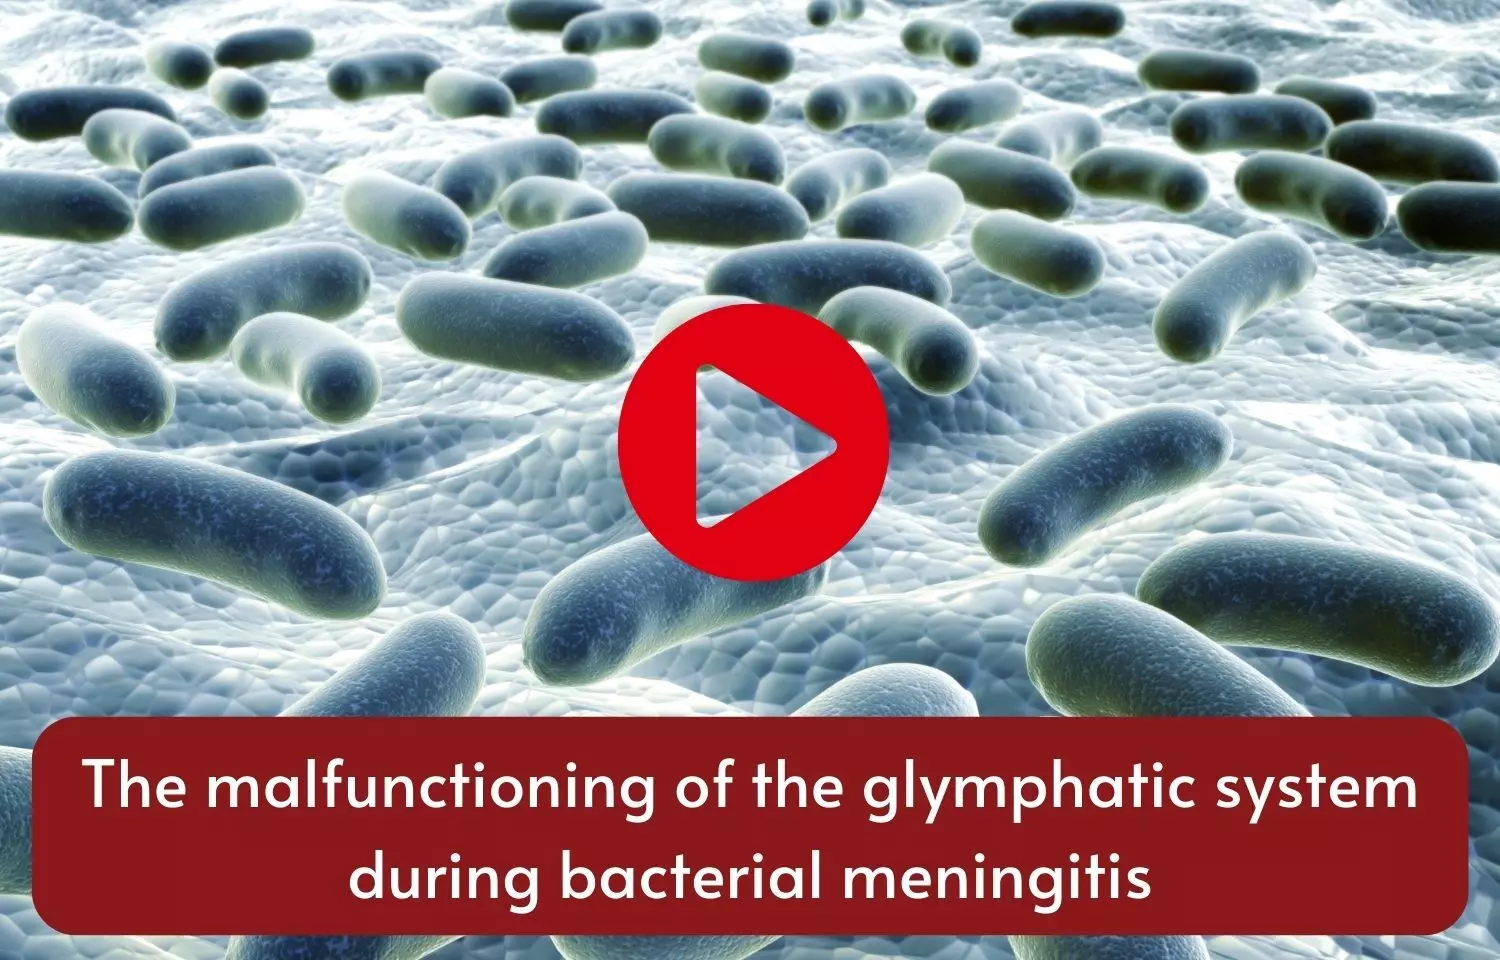 The malfunctioning of the glymphatic system during bacterial meningitis